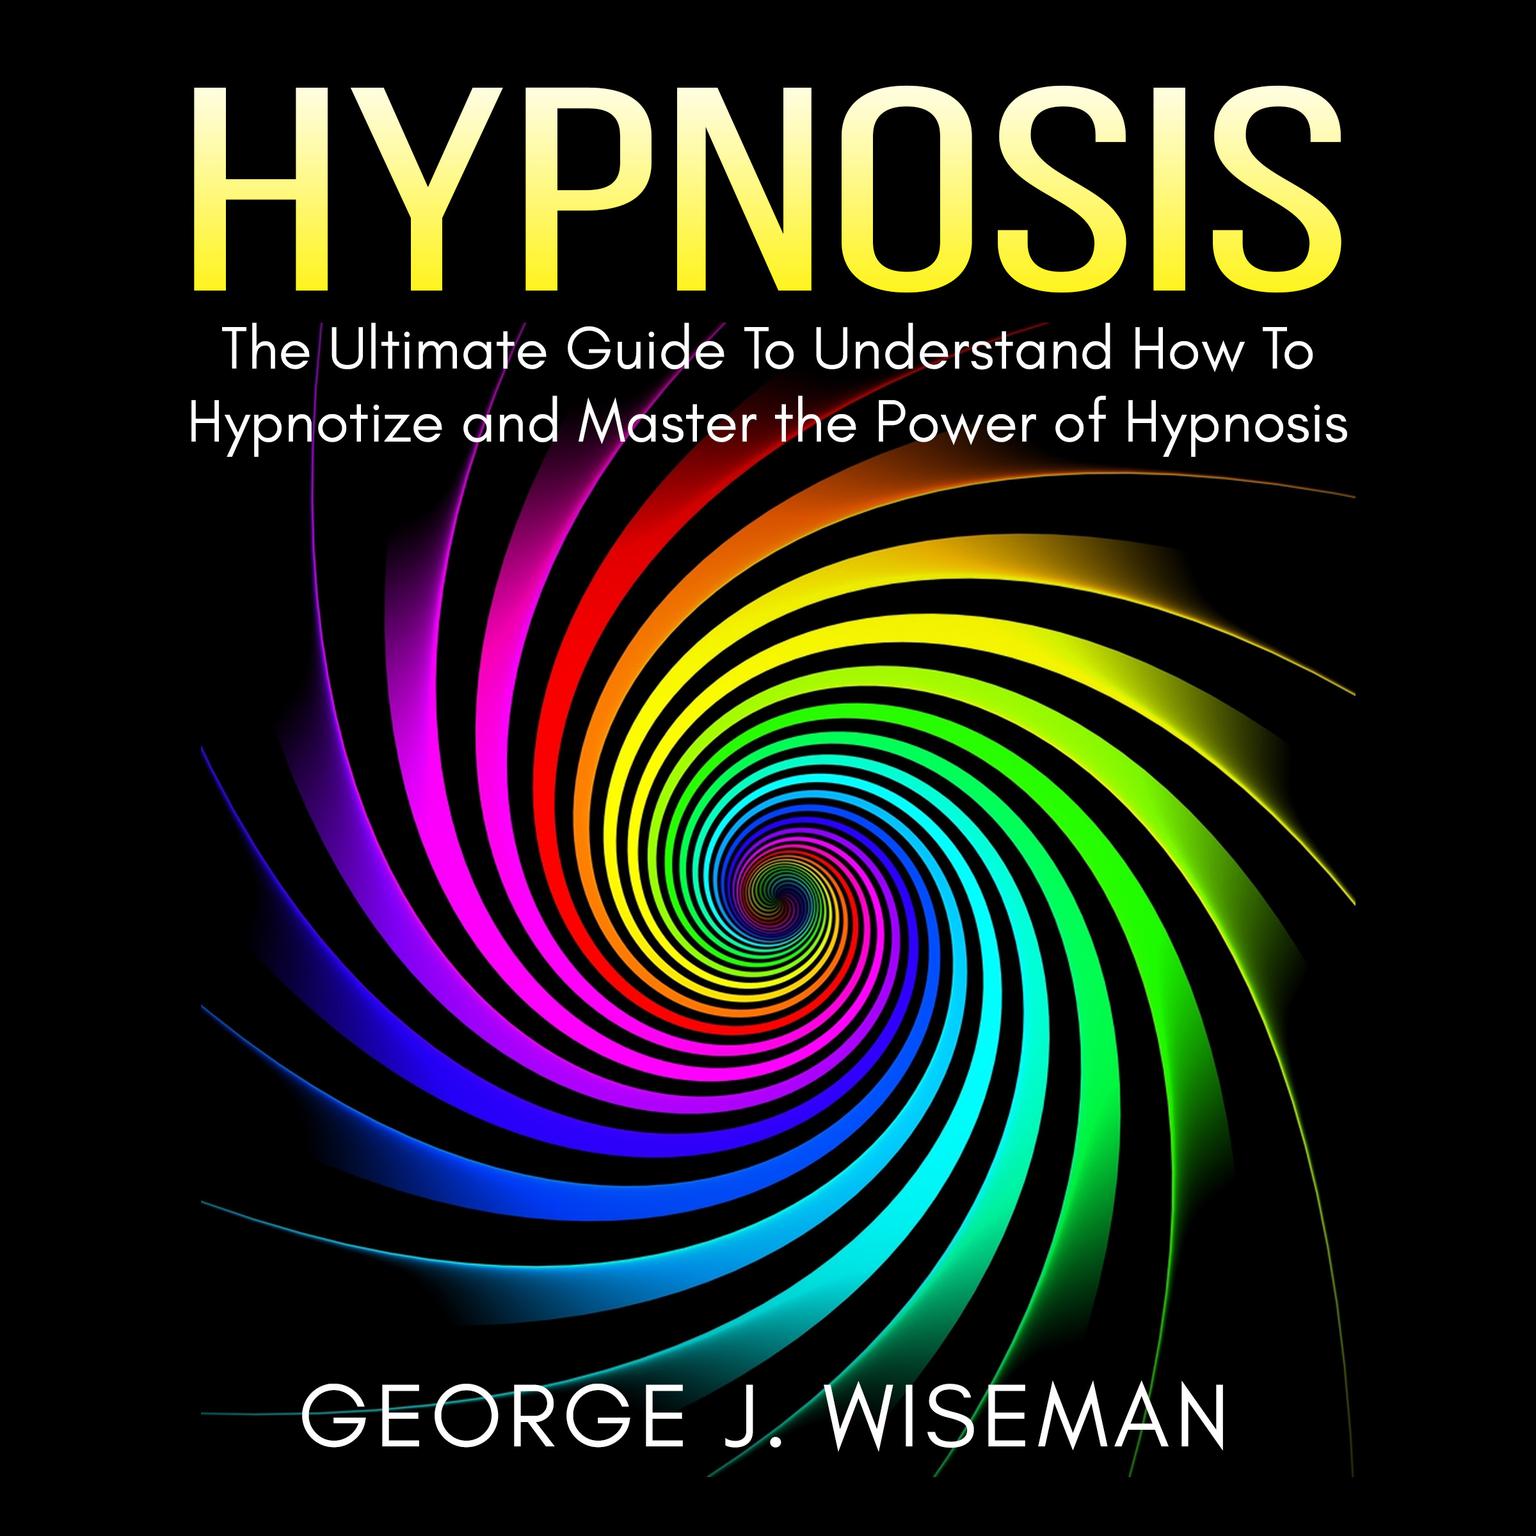 Hypnosis: The Ultimate Guide To Understand How To Hypnotize and Master the Power of Hypnosis Audiobook, by George J. Wiseman